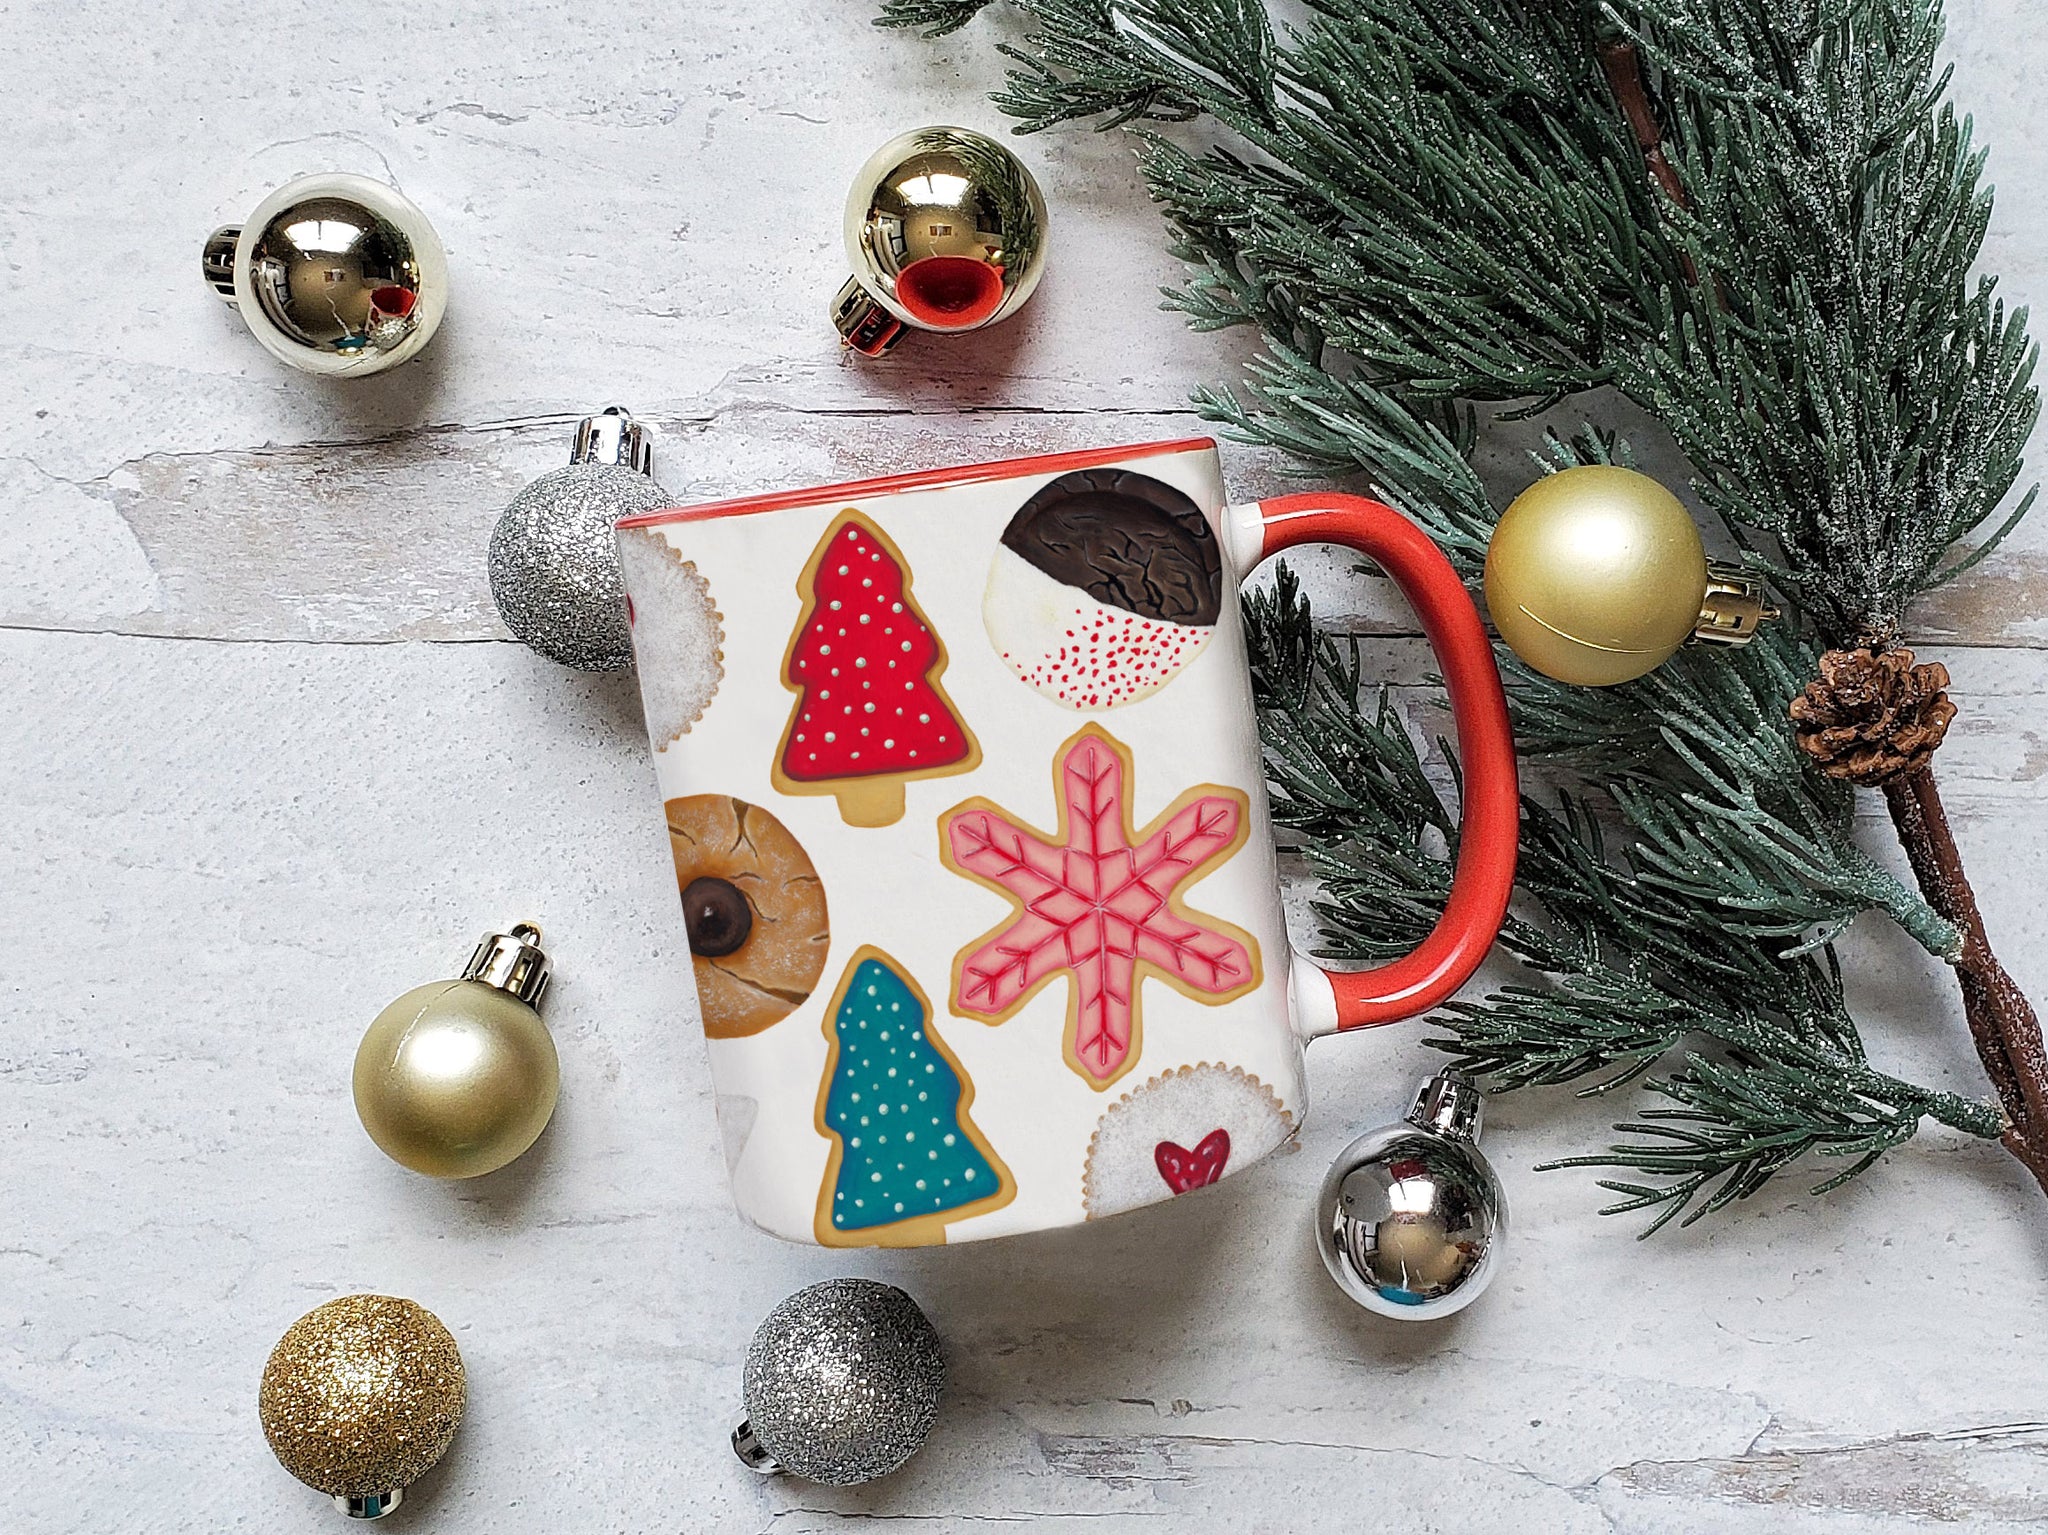 ceramic mug with Illustrated Christmas cookies pattern and a red handle styled with gold and silver ornaments and a tree bough